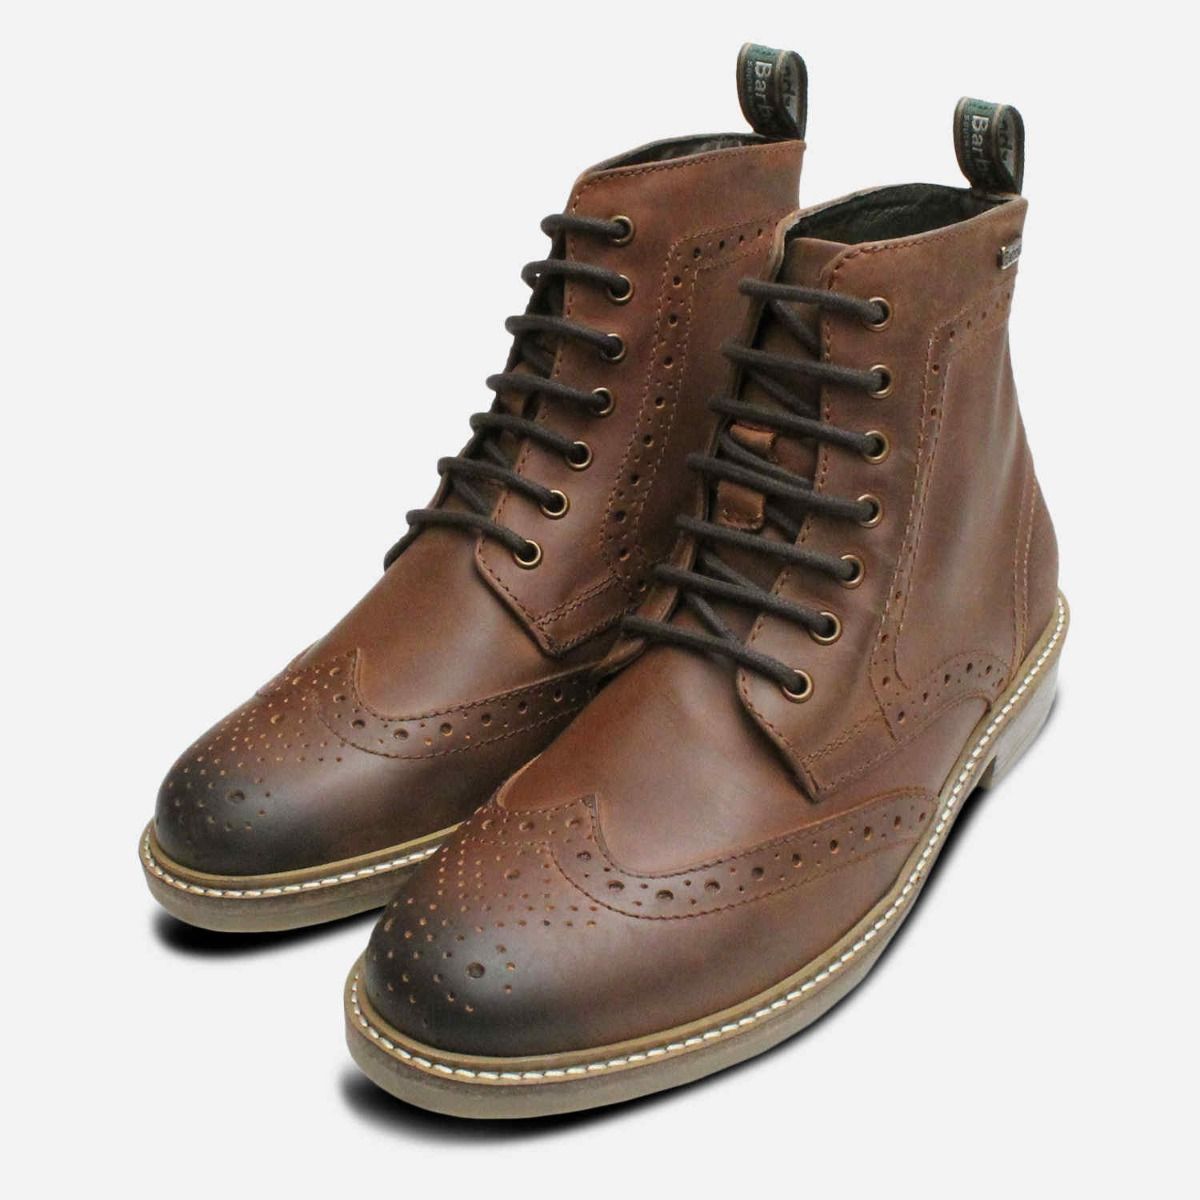 Country Brogues in Waxy Brown by 